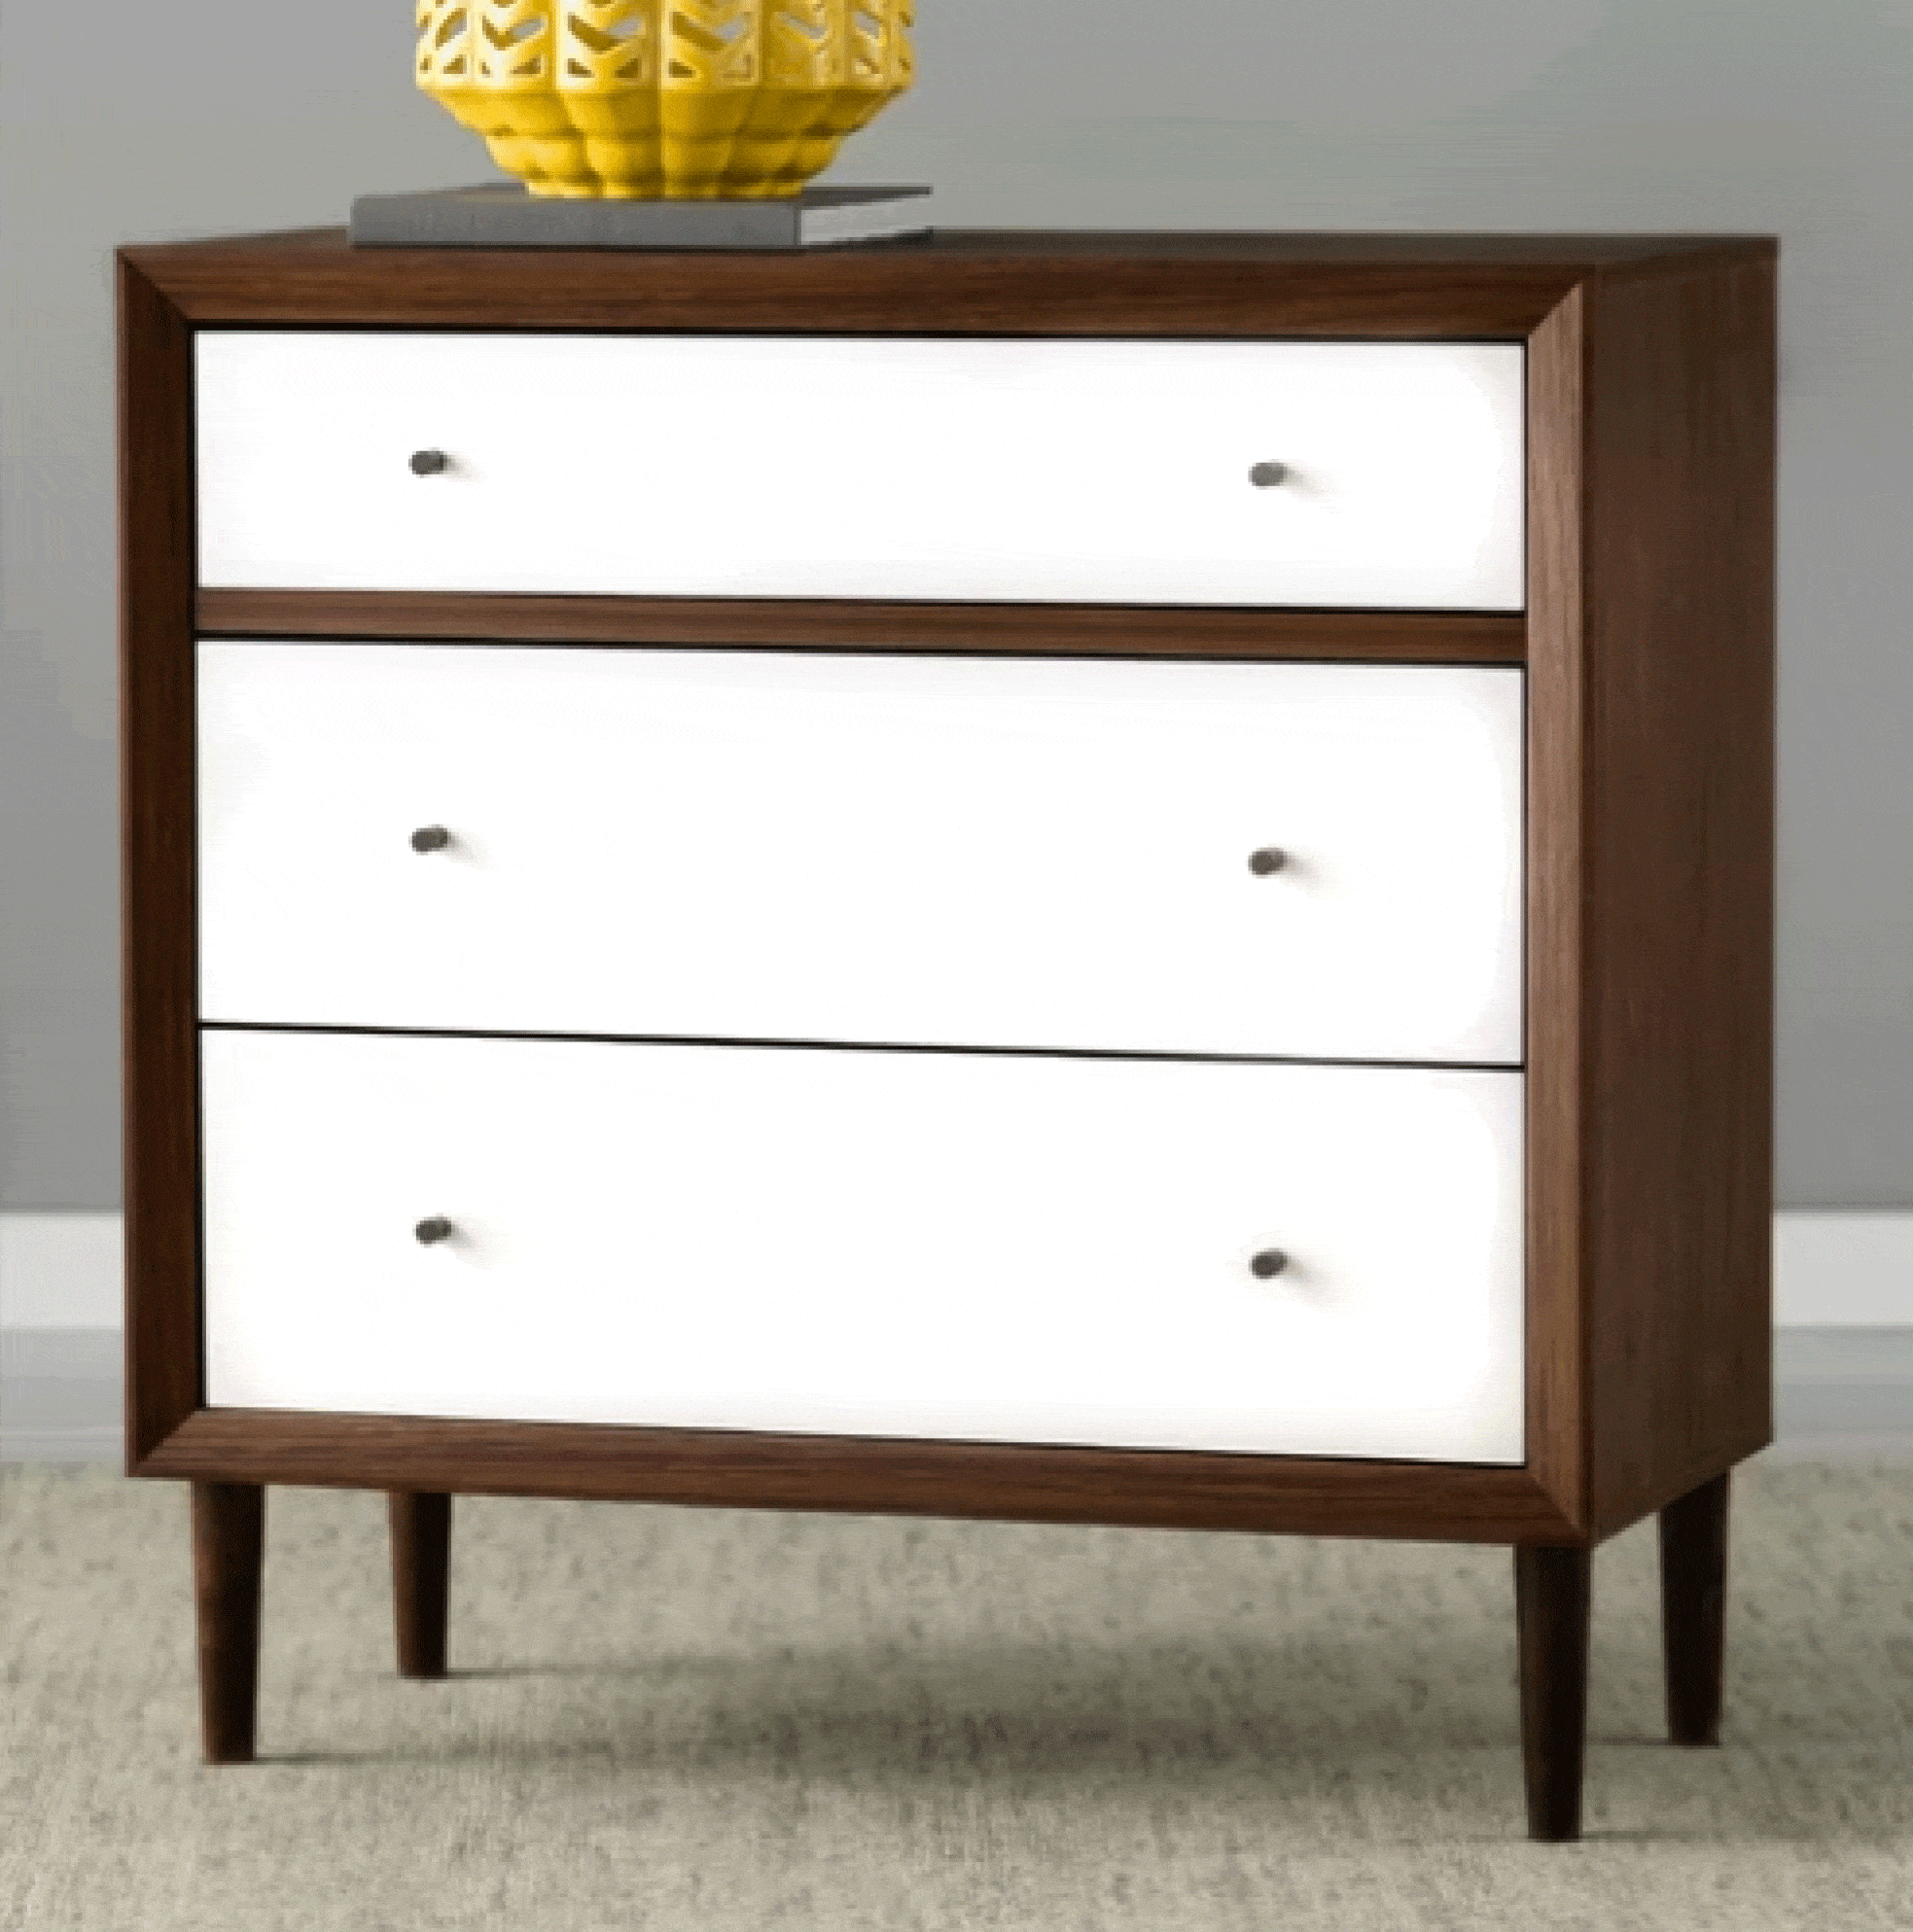 You Should Be Adding New Hardware To, Replacement Knobs For Dresser Drawers